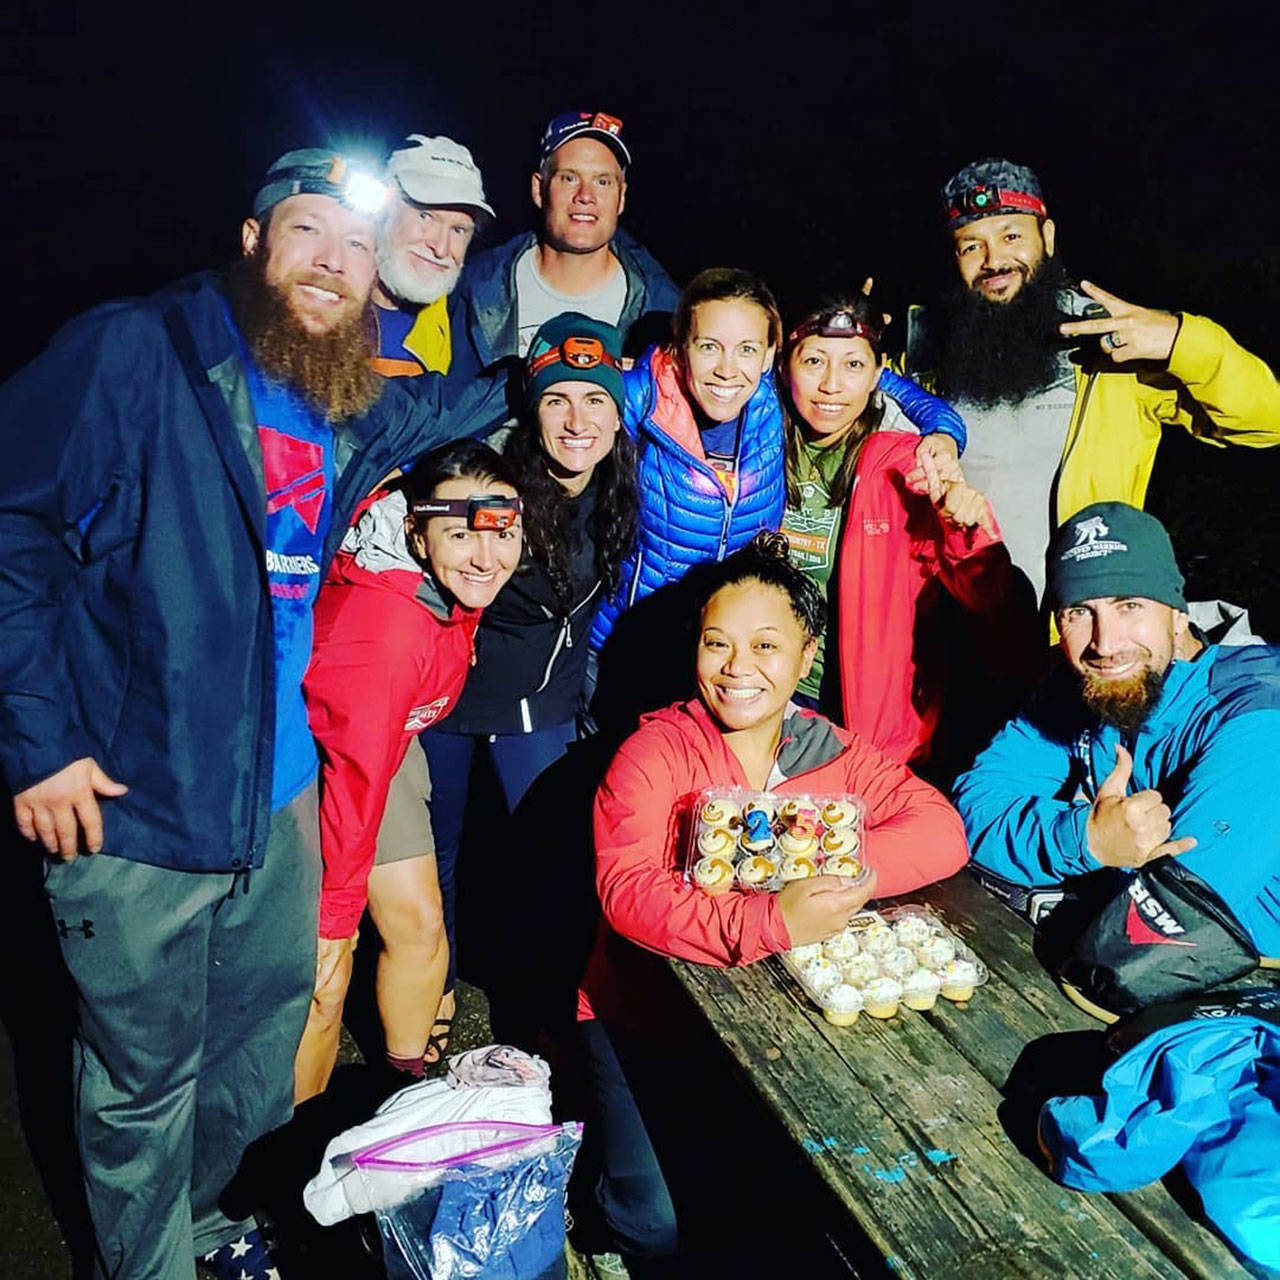 Photo courtesy of Naomi Layco                                Members of the Mt. Baker expedition team surprise Naomi Layco (center) with cupcakes for her 33rd birthday, before their big climb.